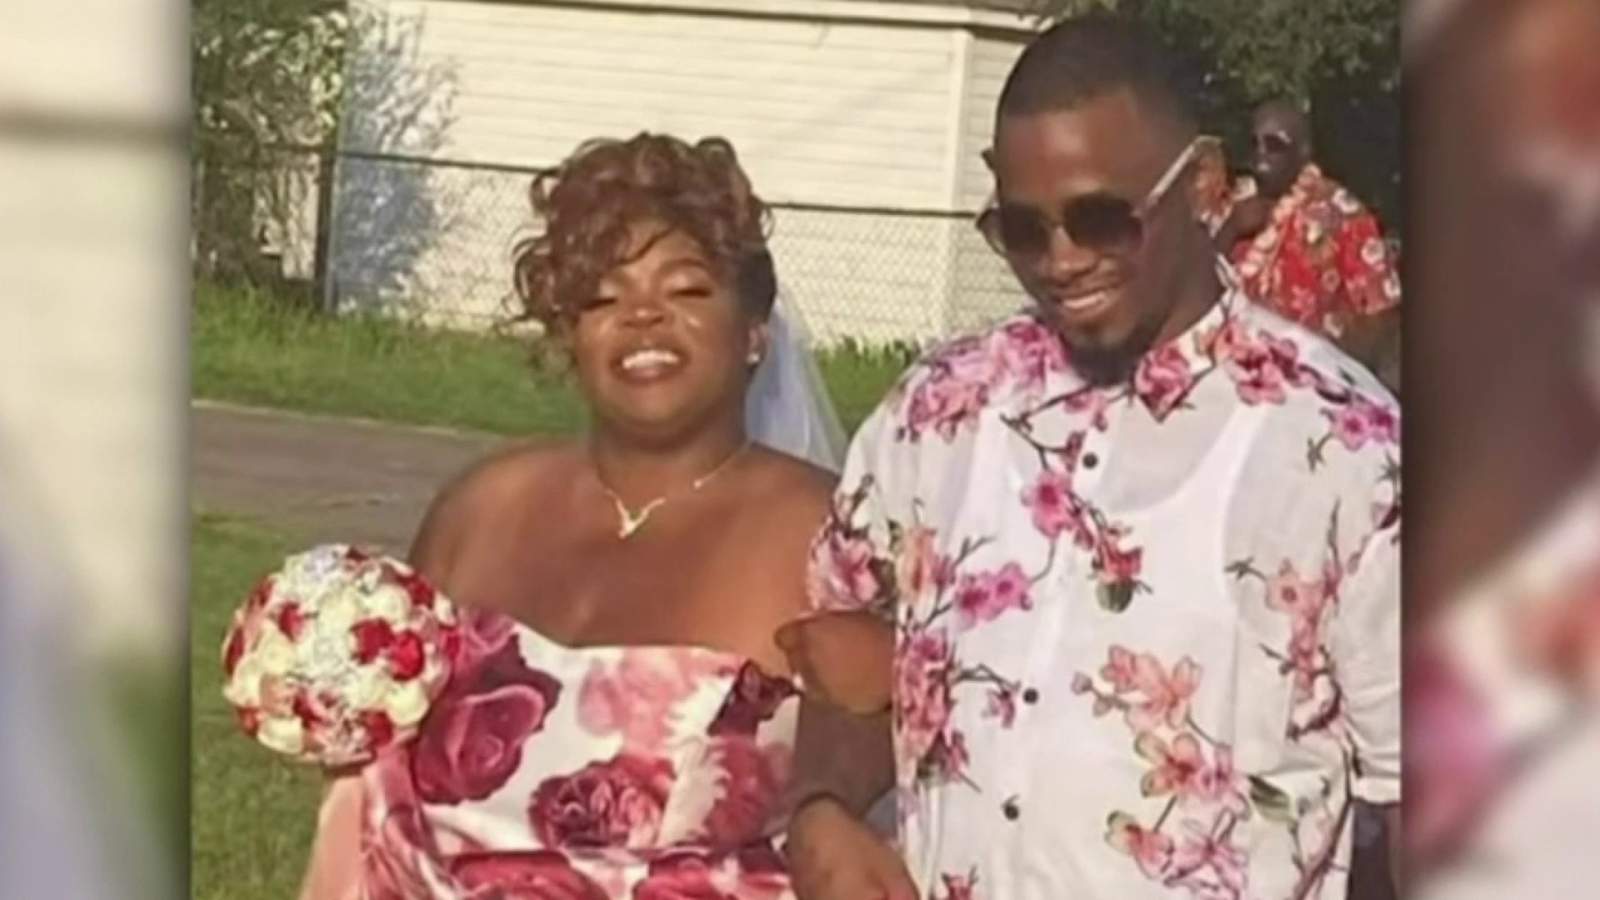 Wedding crashers steal every single gift from couple’s outdoor Melvindale wedding